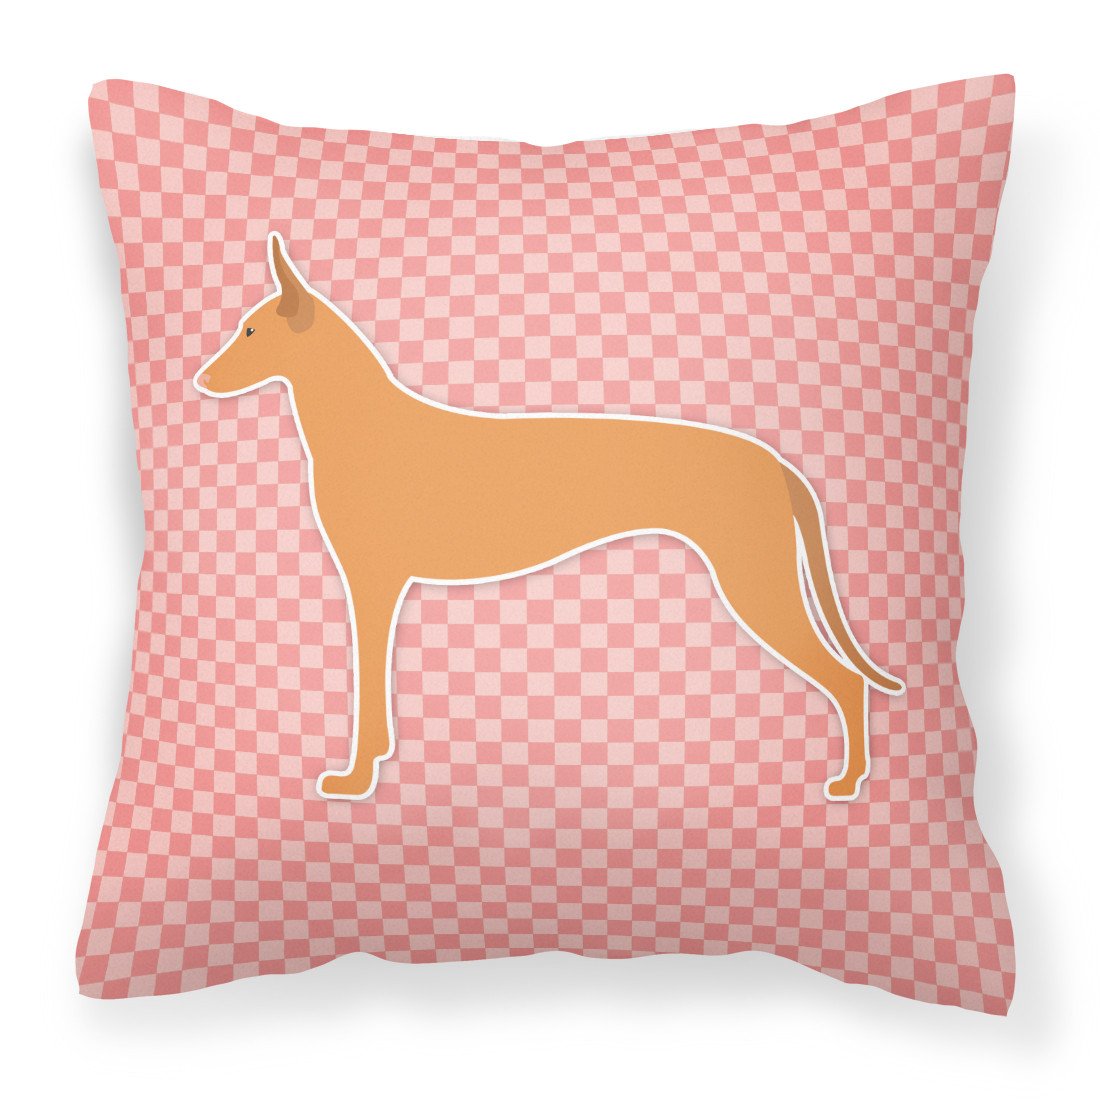 Pharaoh Hound Checkerboard Pink Fabric Decorative Pillow BB3588PW1818 by Caroline's Treasures